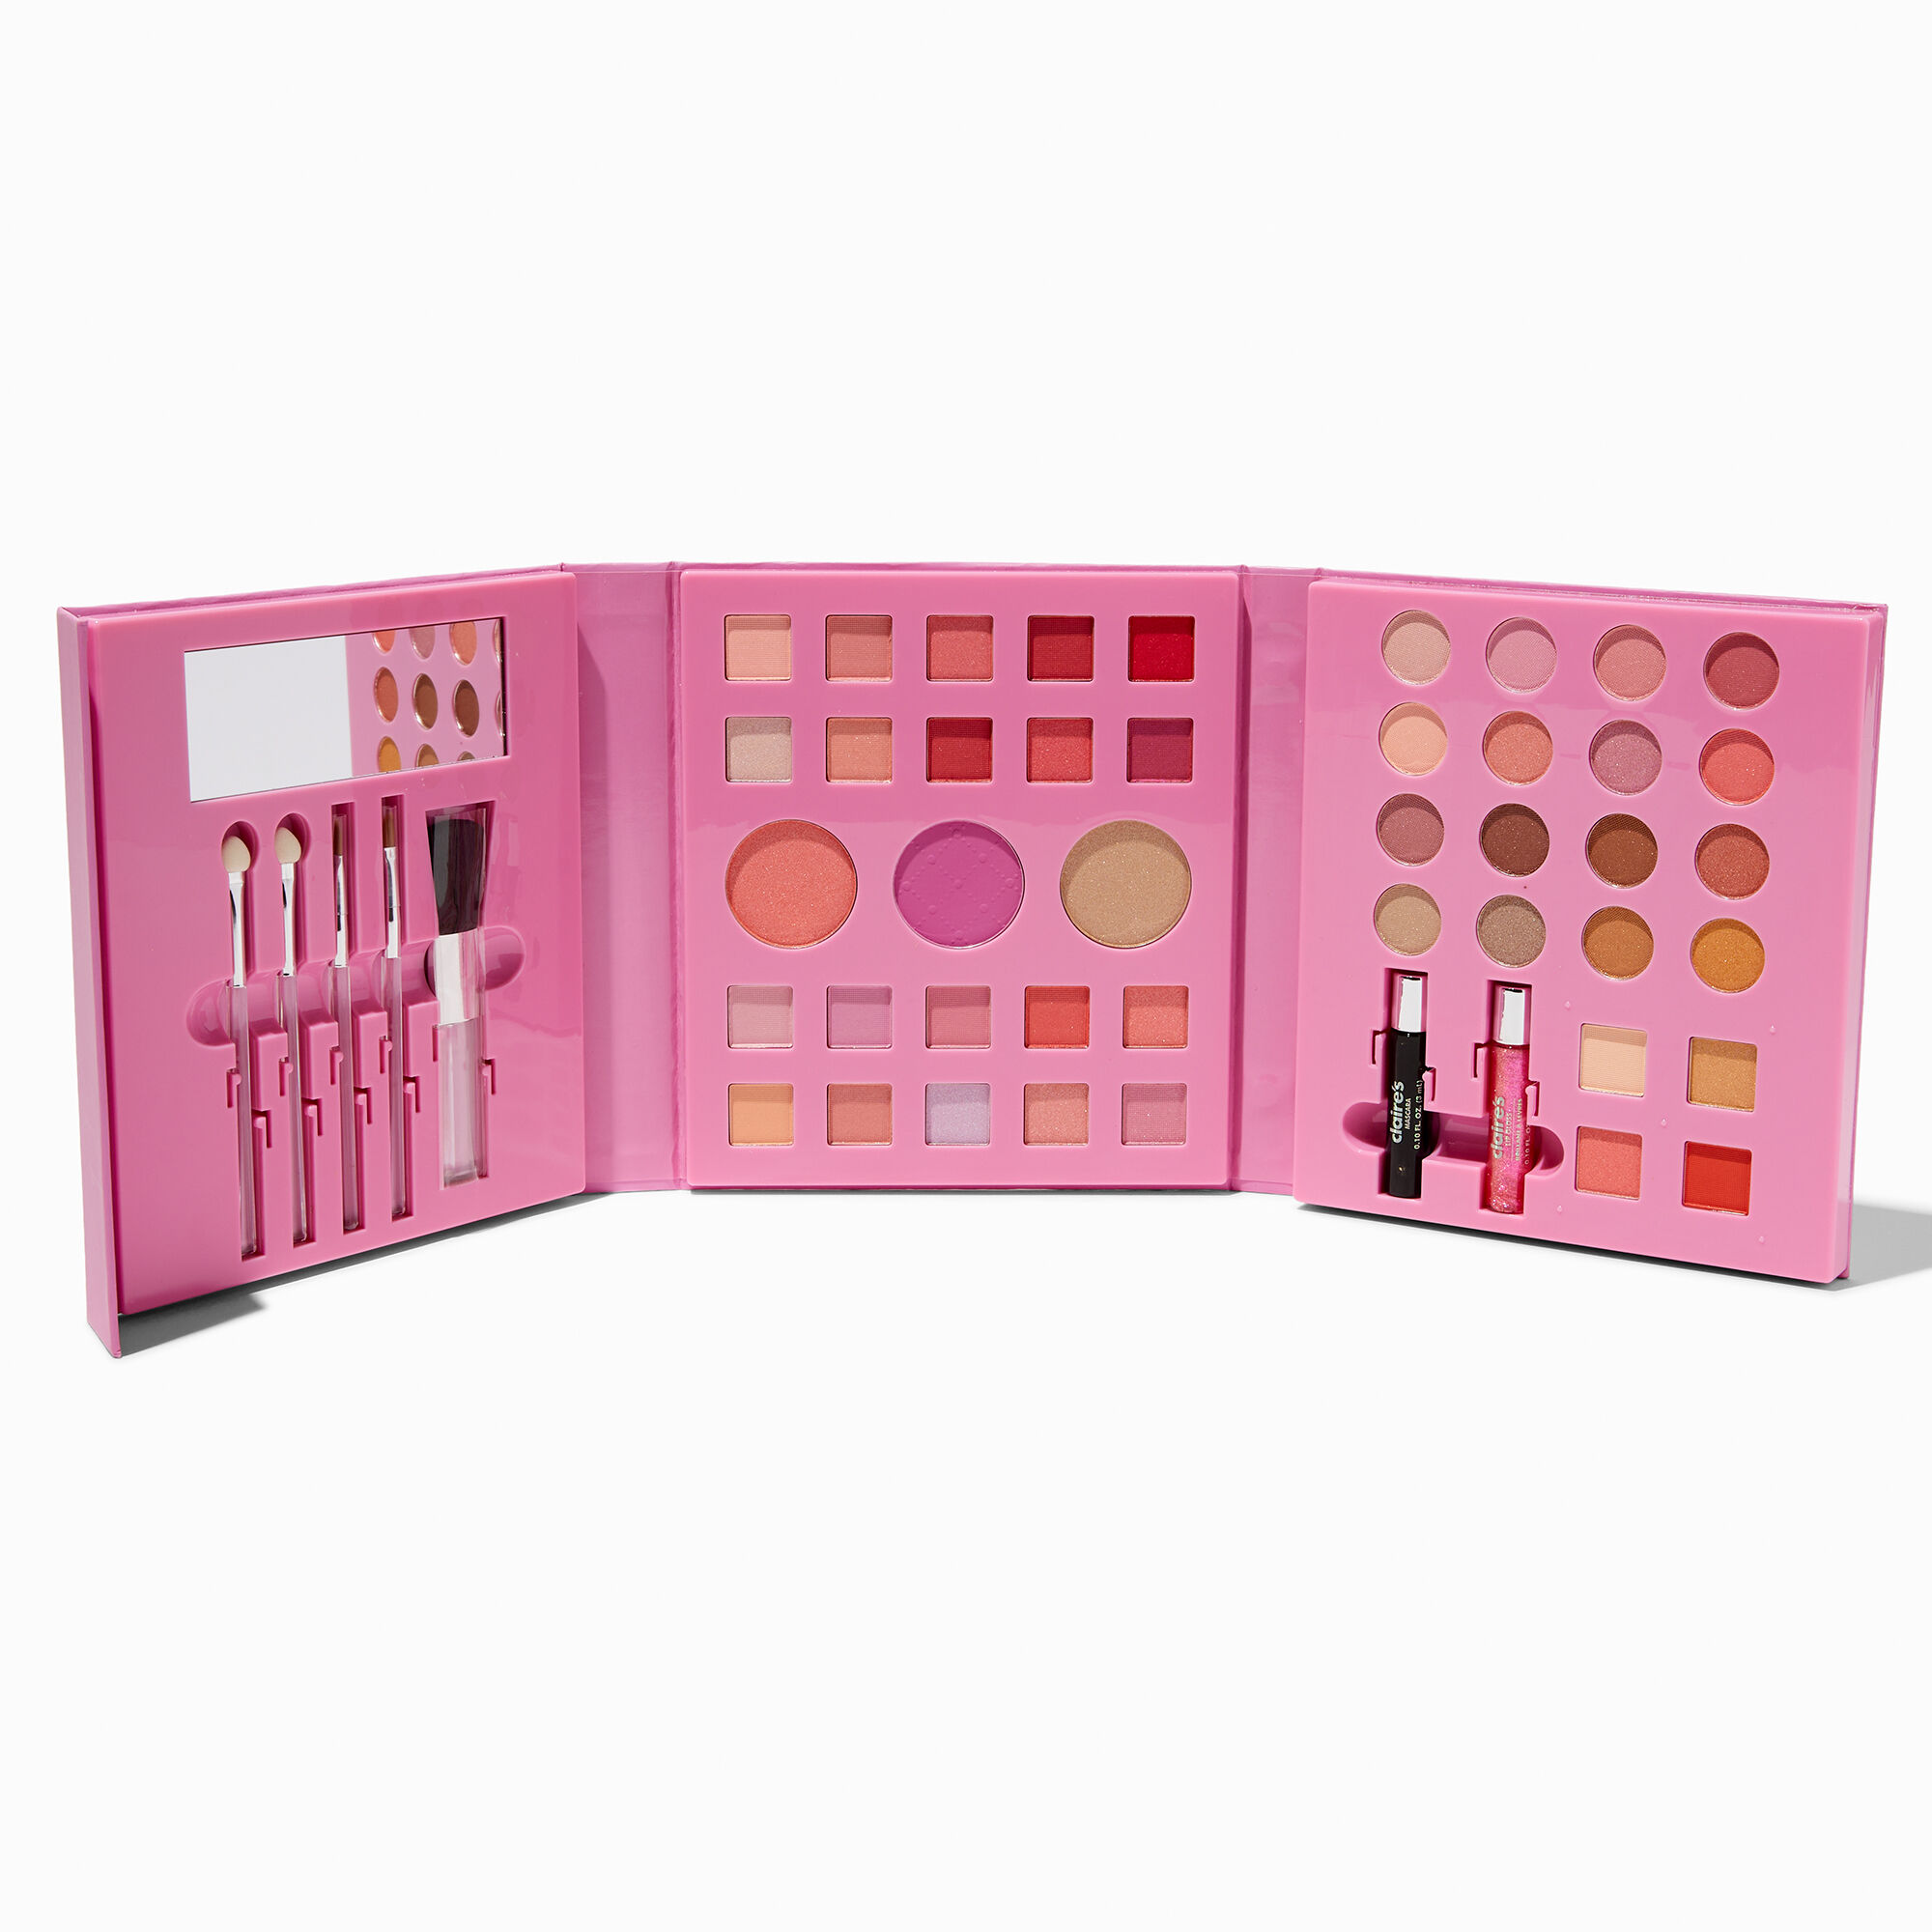 View Claires Bling Quilted 48 Piece Makeup Set Pink information